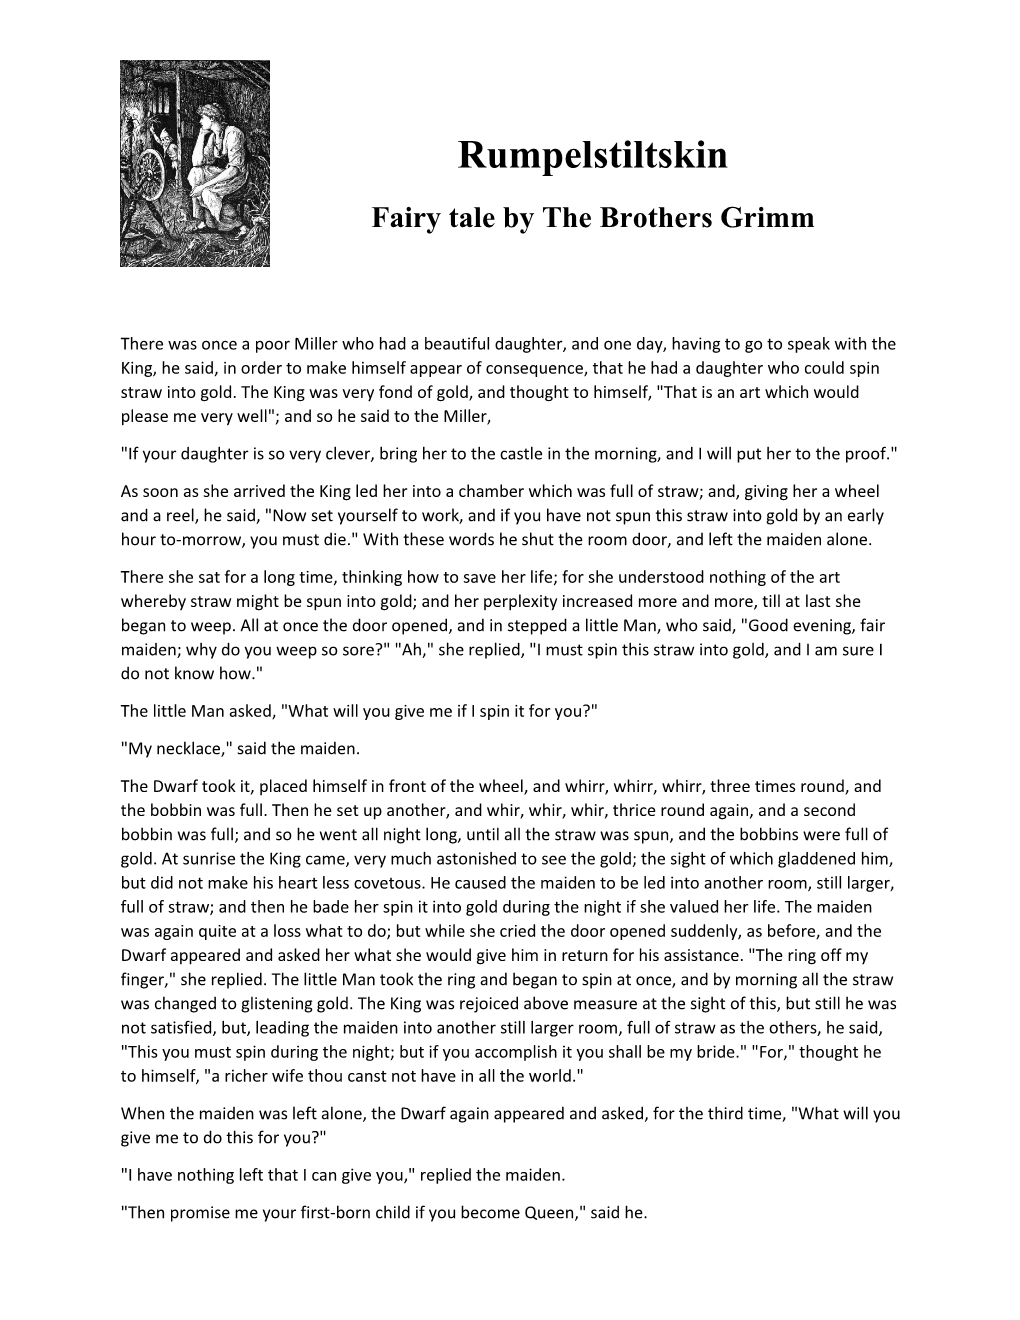 Rumpelstiltskin Fairy Tale by the Brothers Grimm